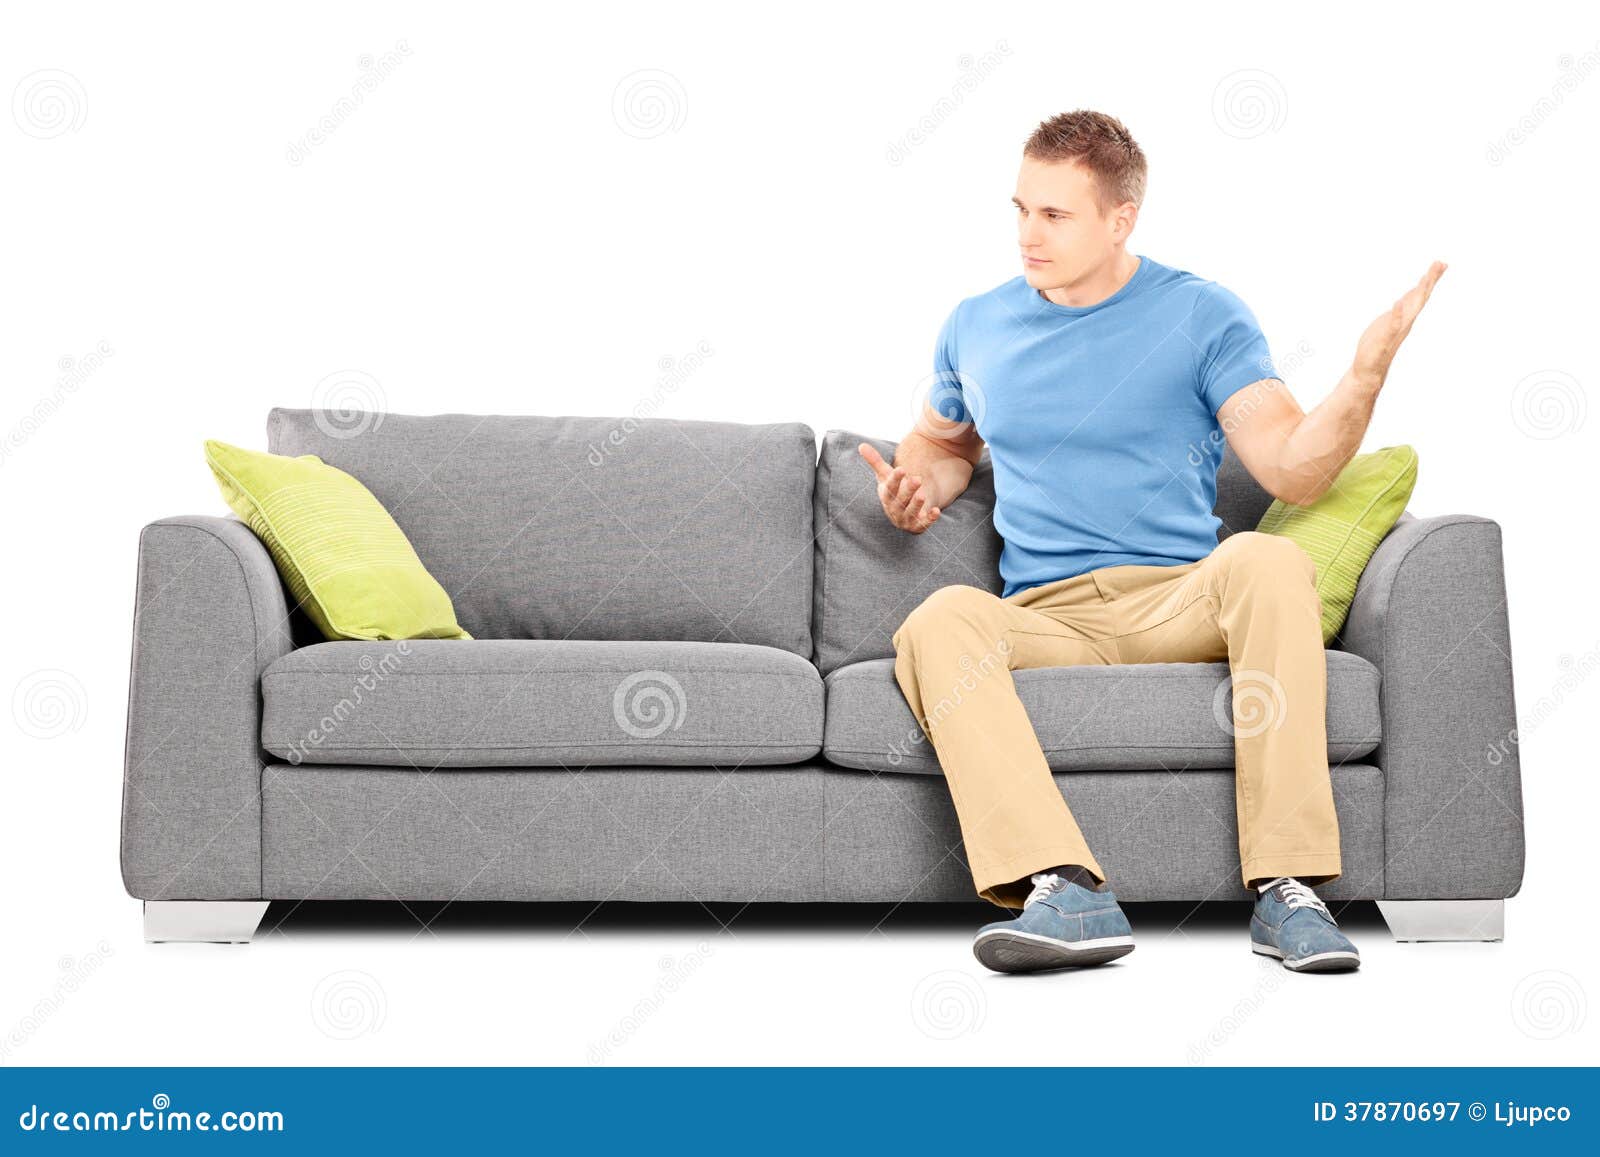 Angry Man Sitting On Couch And Violently Swinging His Hand Stock Image Image Of Couch Clothes 37870697